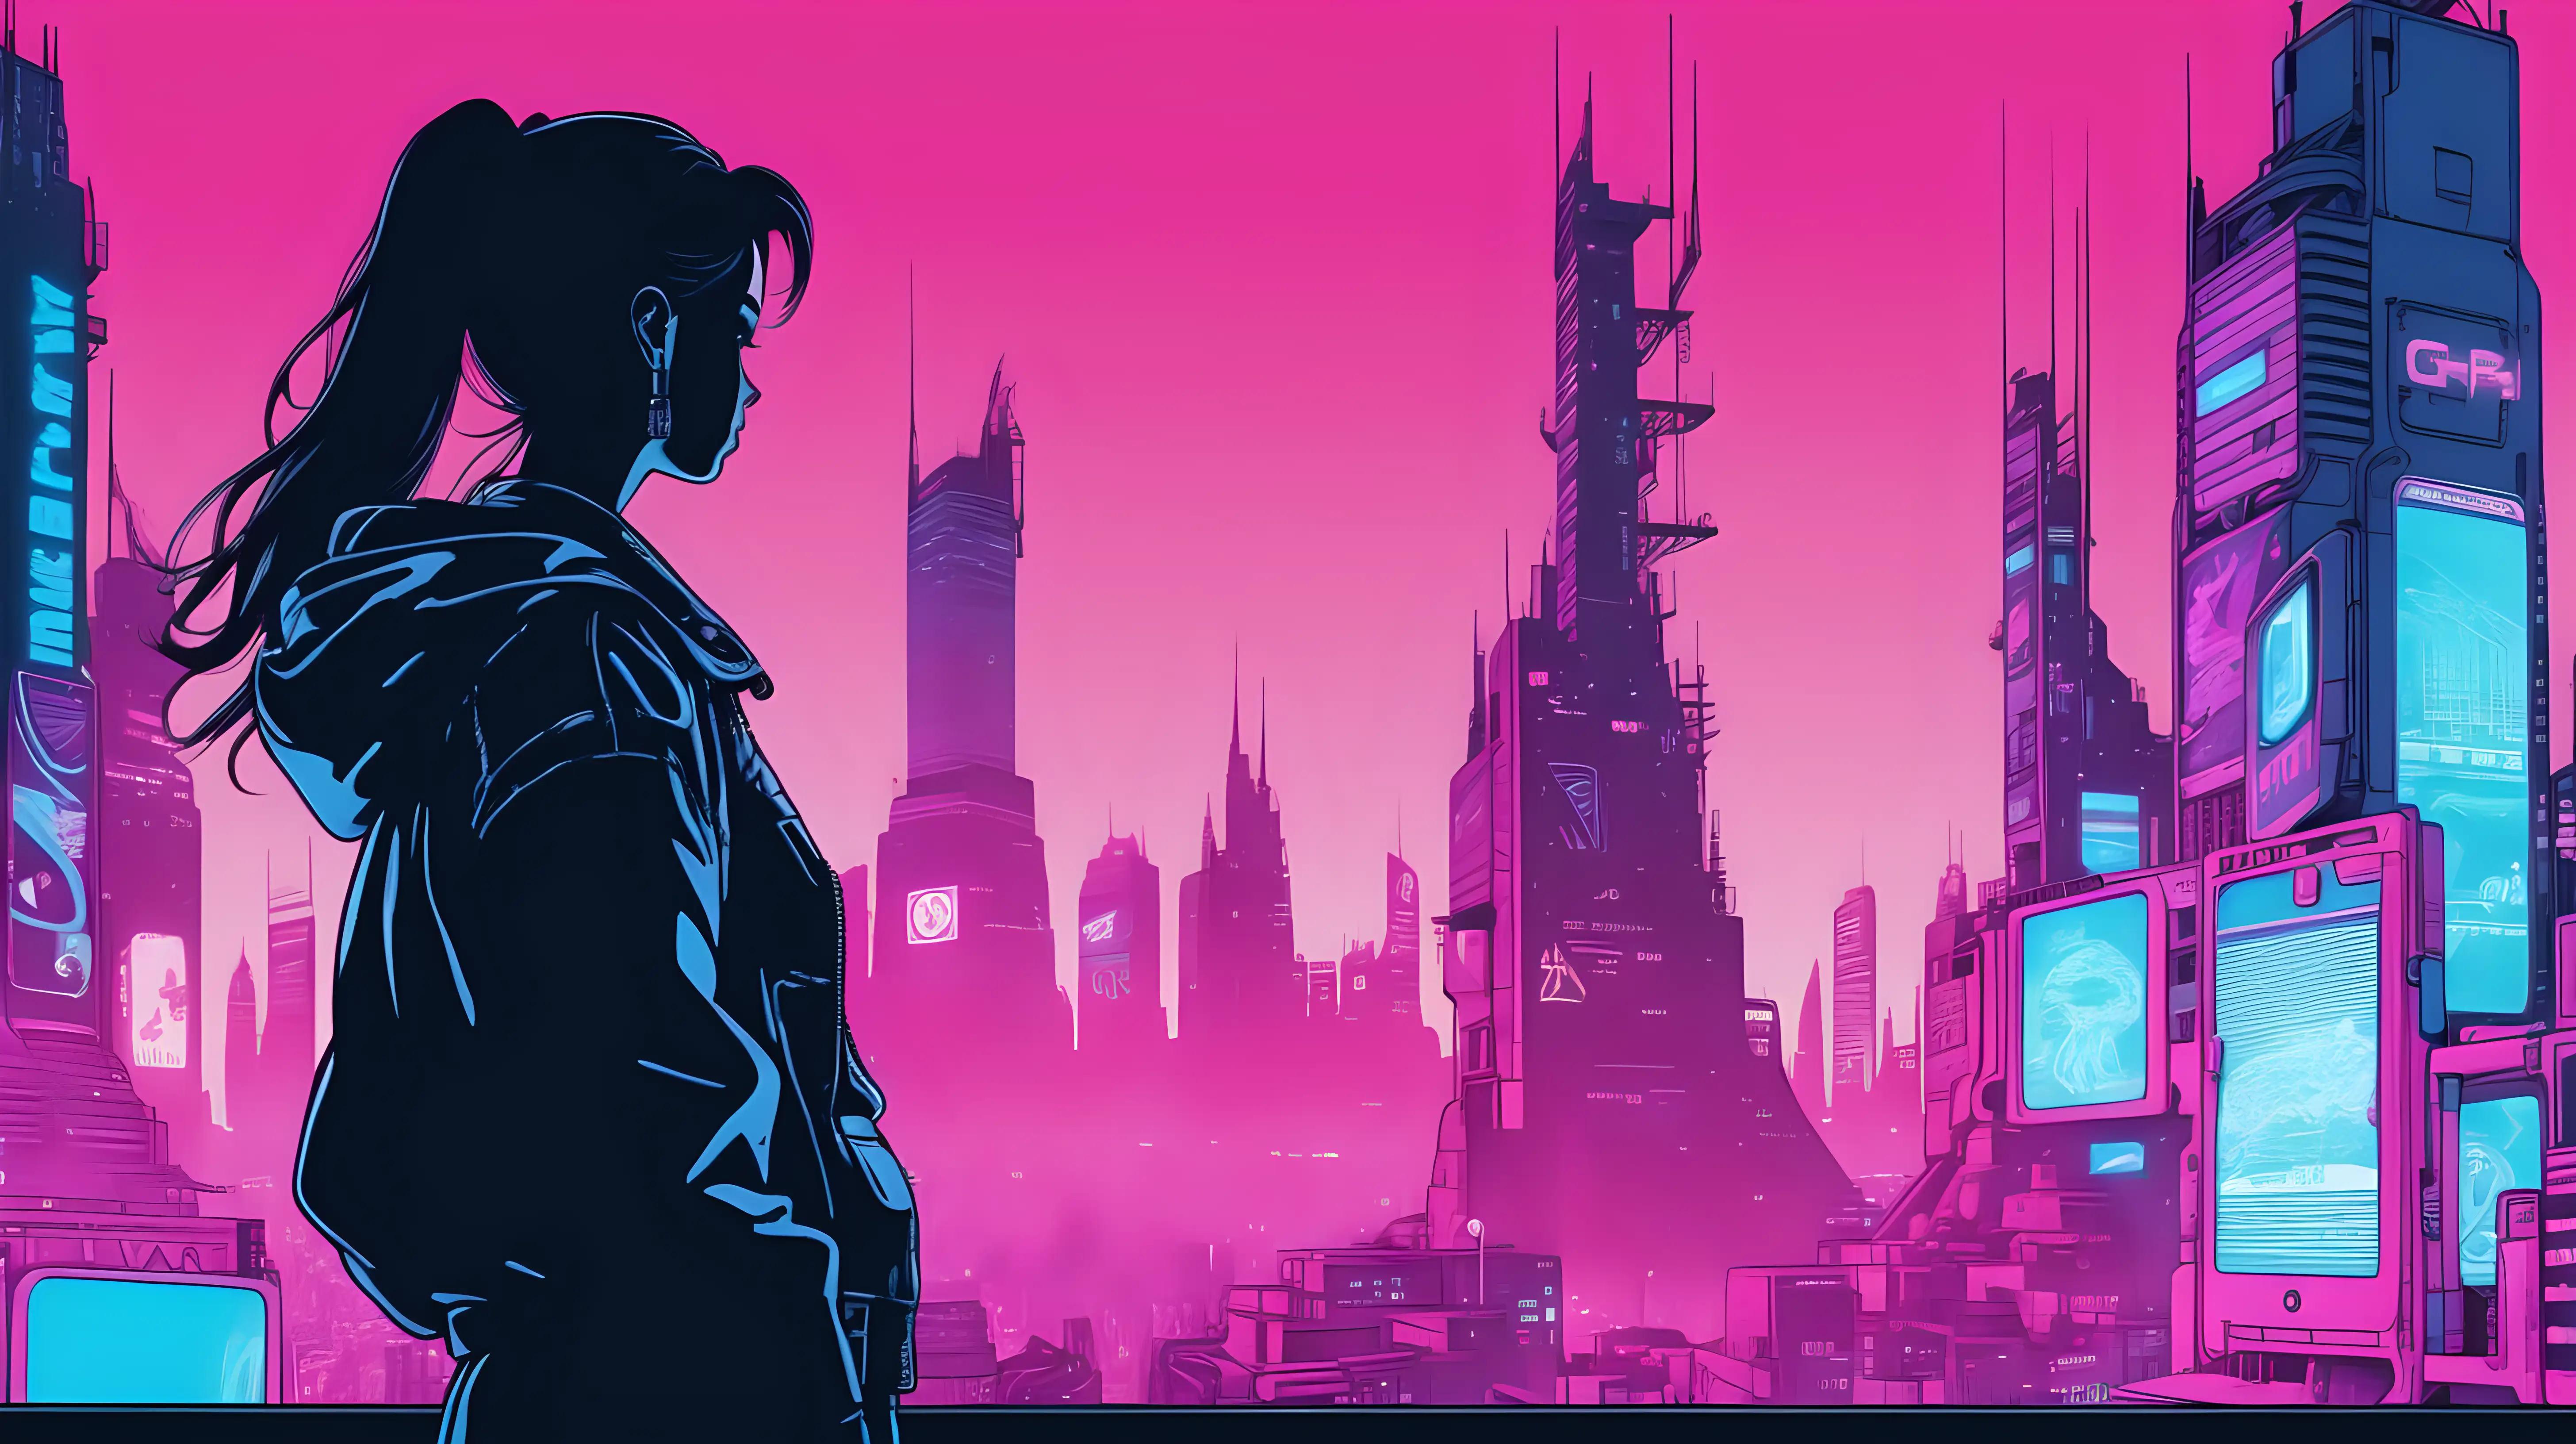 a silhouette of a woman viewing cyberpunk city.  Comic book style illustration. Pink and blue colors